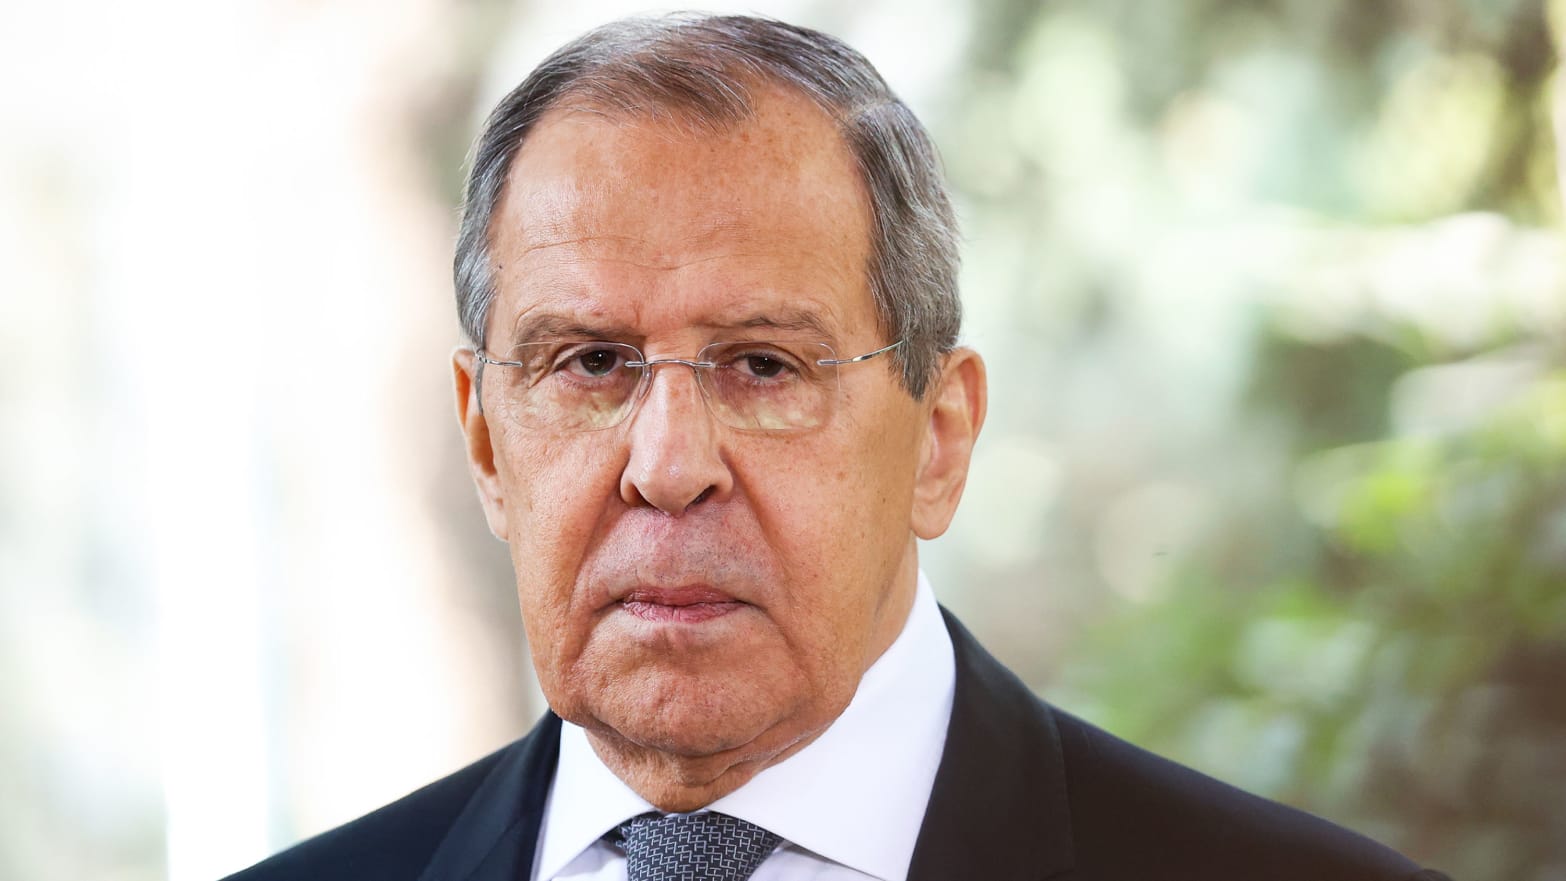 Top Russian Diplomat Sergey Lavrov's Secret Life With Millionaire Mistress  Exposed